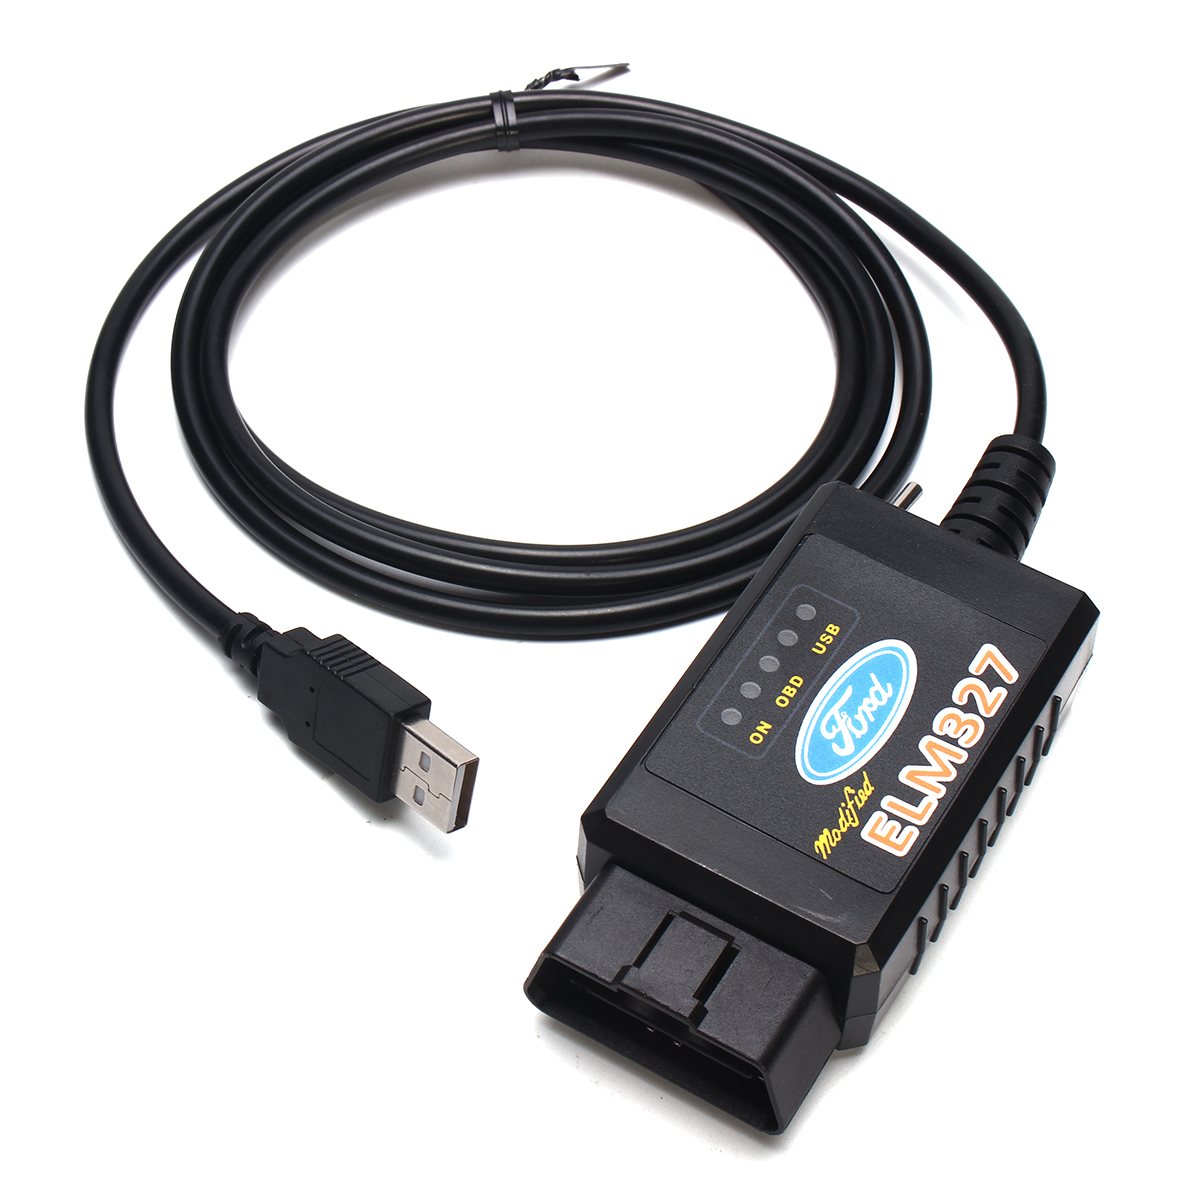 ELM327 USB Modified OBD2 Car Diagnostic Scanner For Ford MS-CAN HS-CAN Mazda Forscan 1